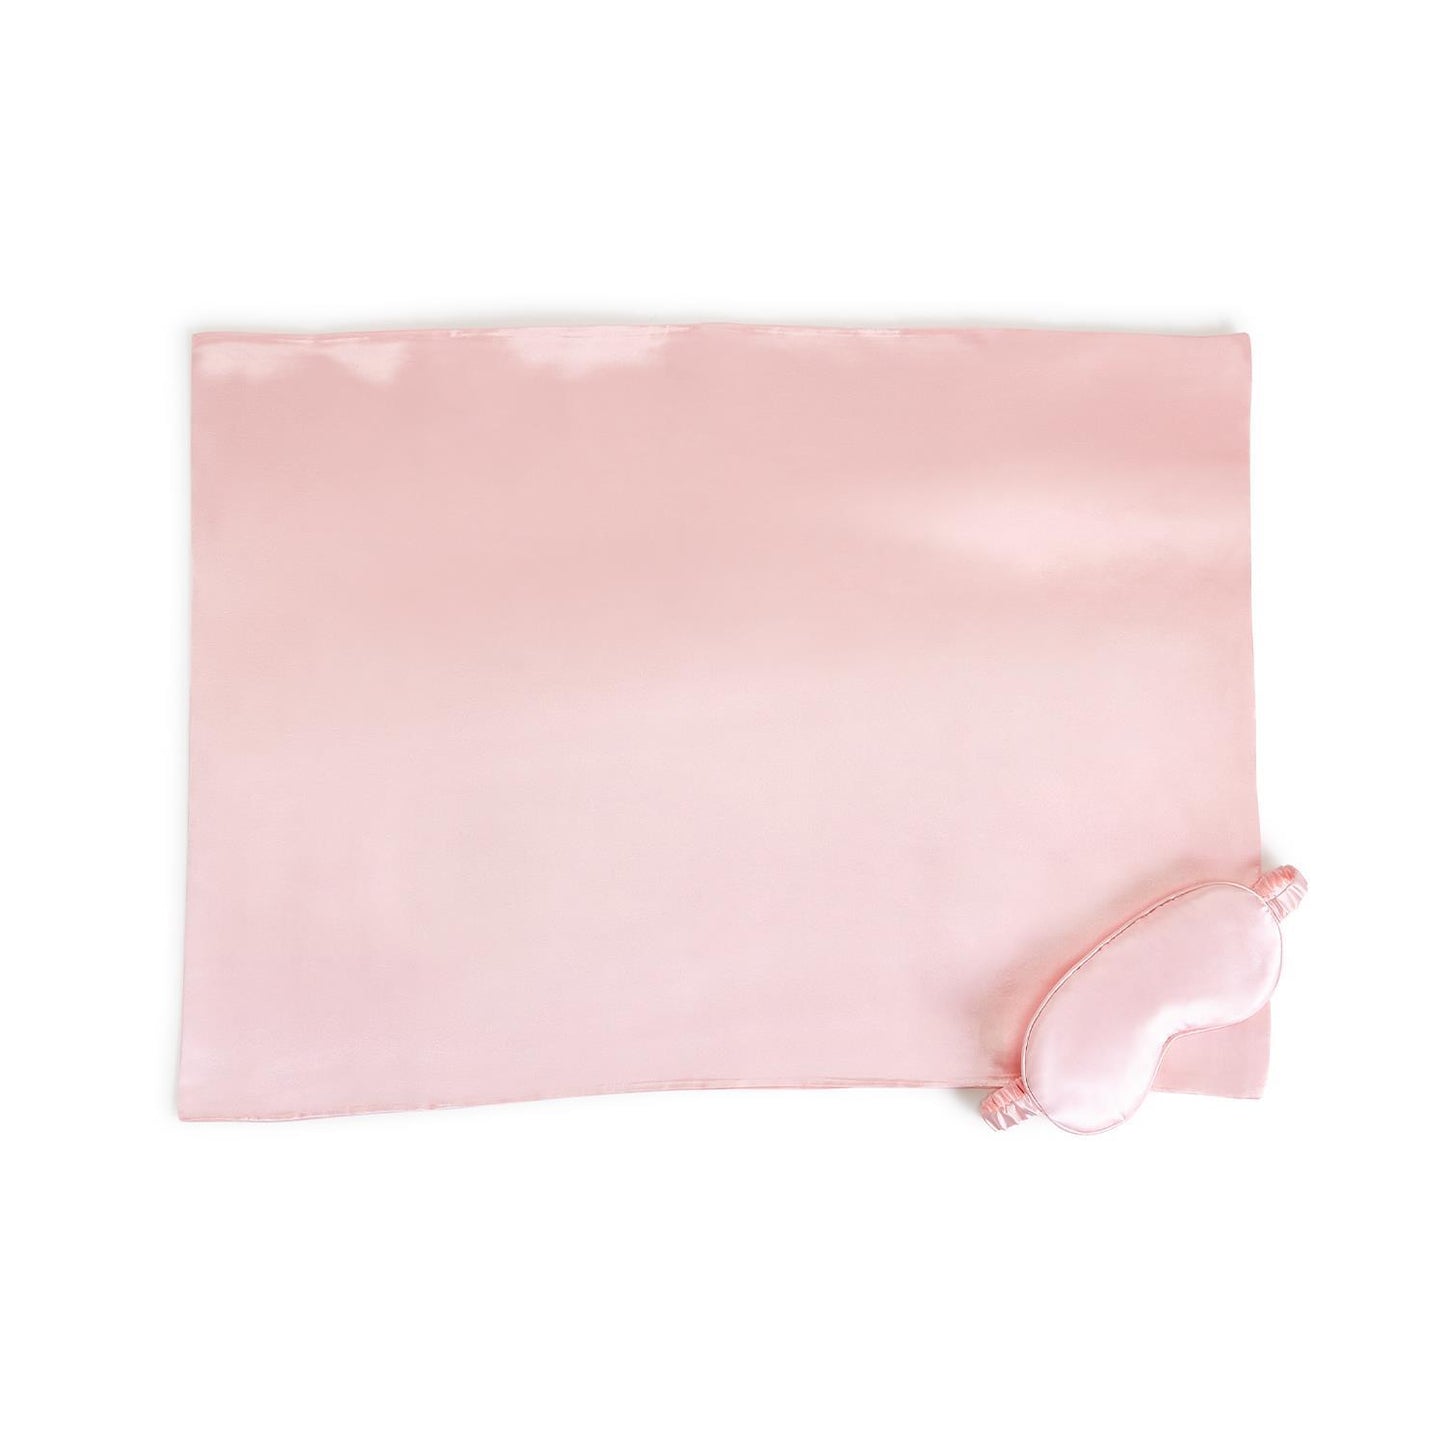 Two's Company Rose Satin Pillowcase And Eye Mask Set In Gift Box